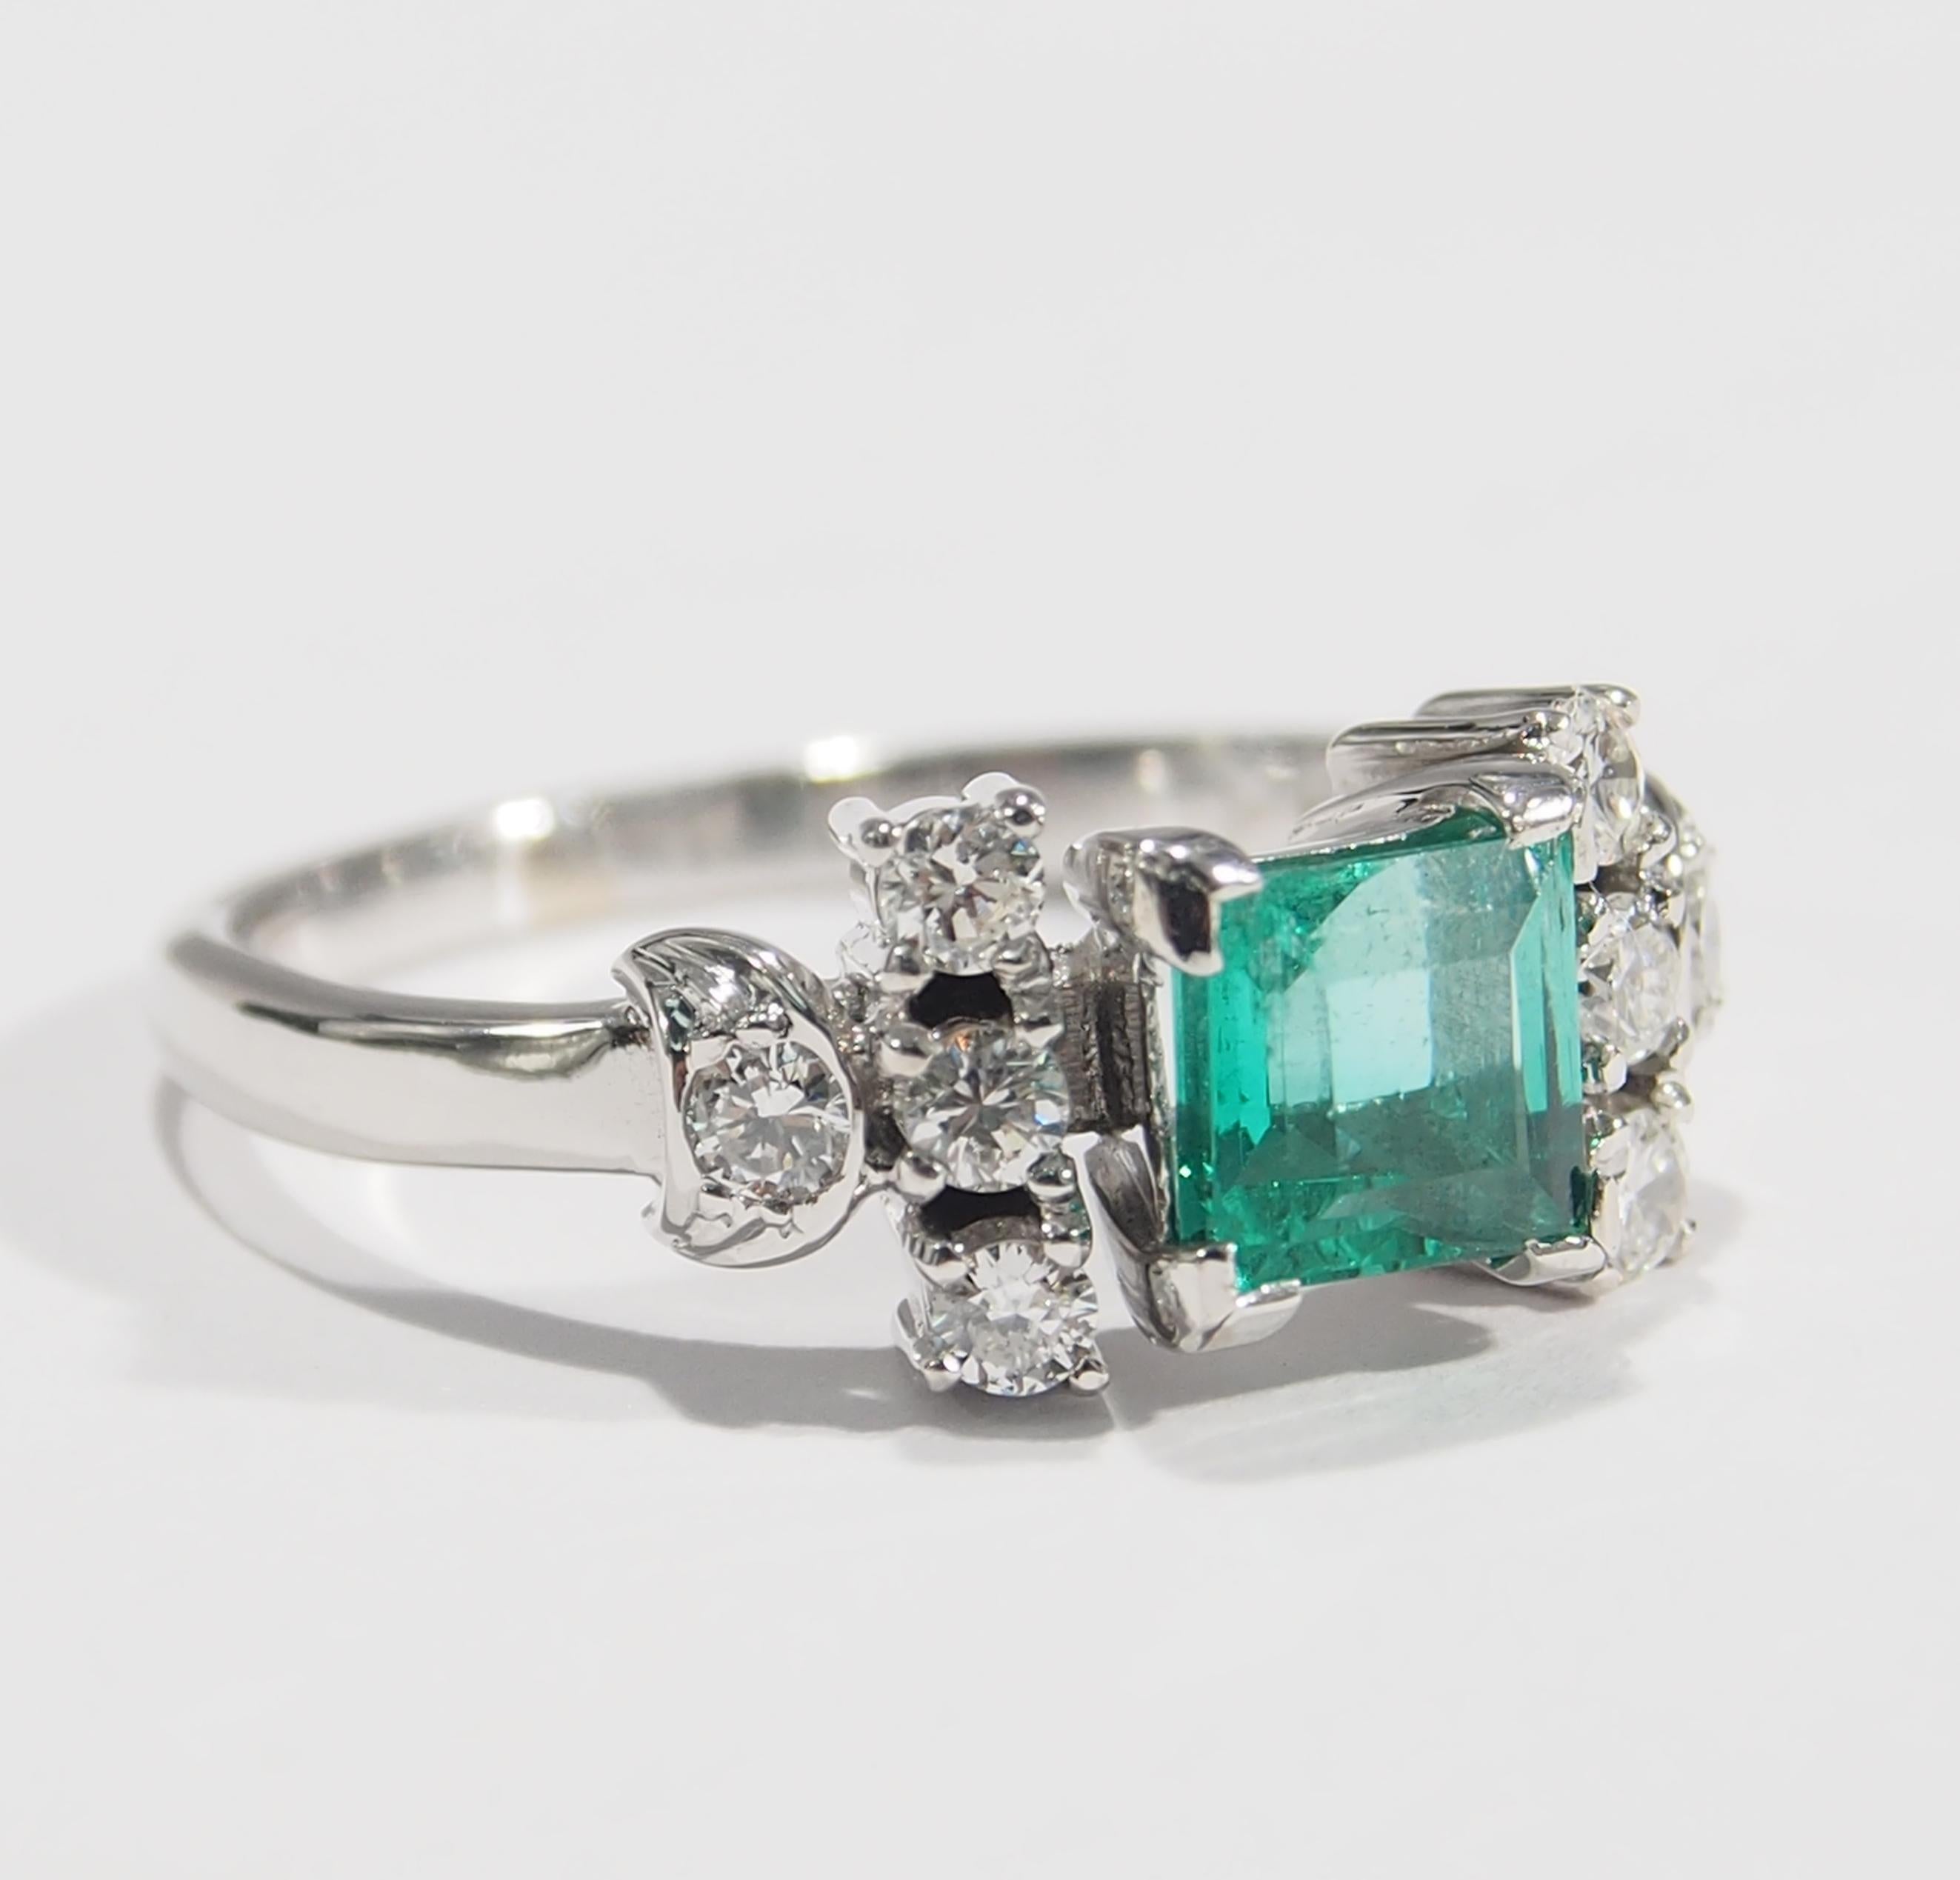 This is a classic 18K White Gold Emerald and Diamond Ring. The Ring is designed with a Square Emerald, approximately 0.80ct. framed by a total of (8) Round Brilliant Cut Diamonds, approximately 0.40ctw, G-H in Color, VS in Clarity on it's sides. The